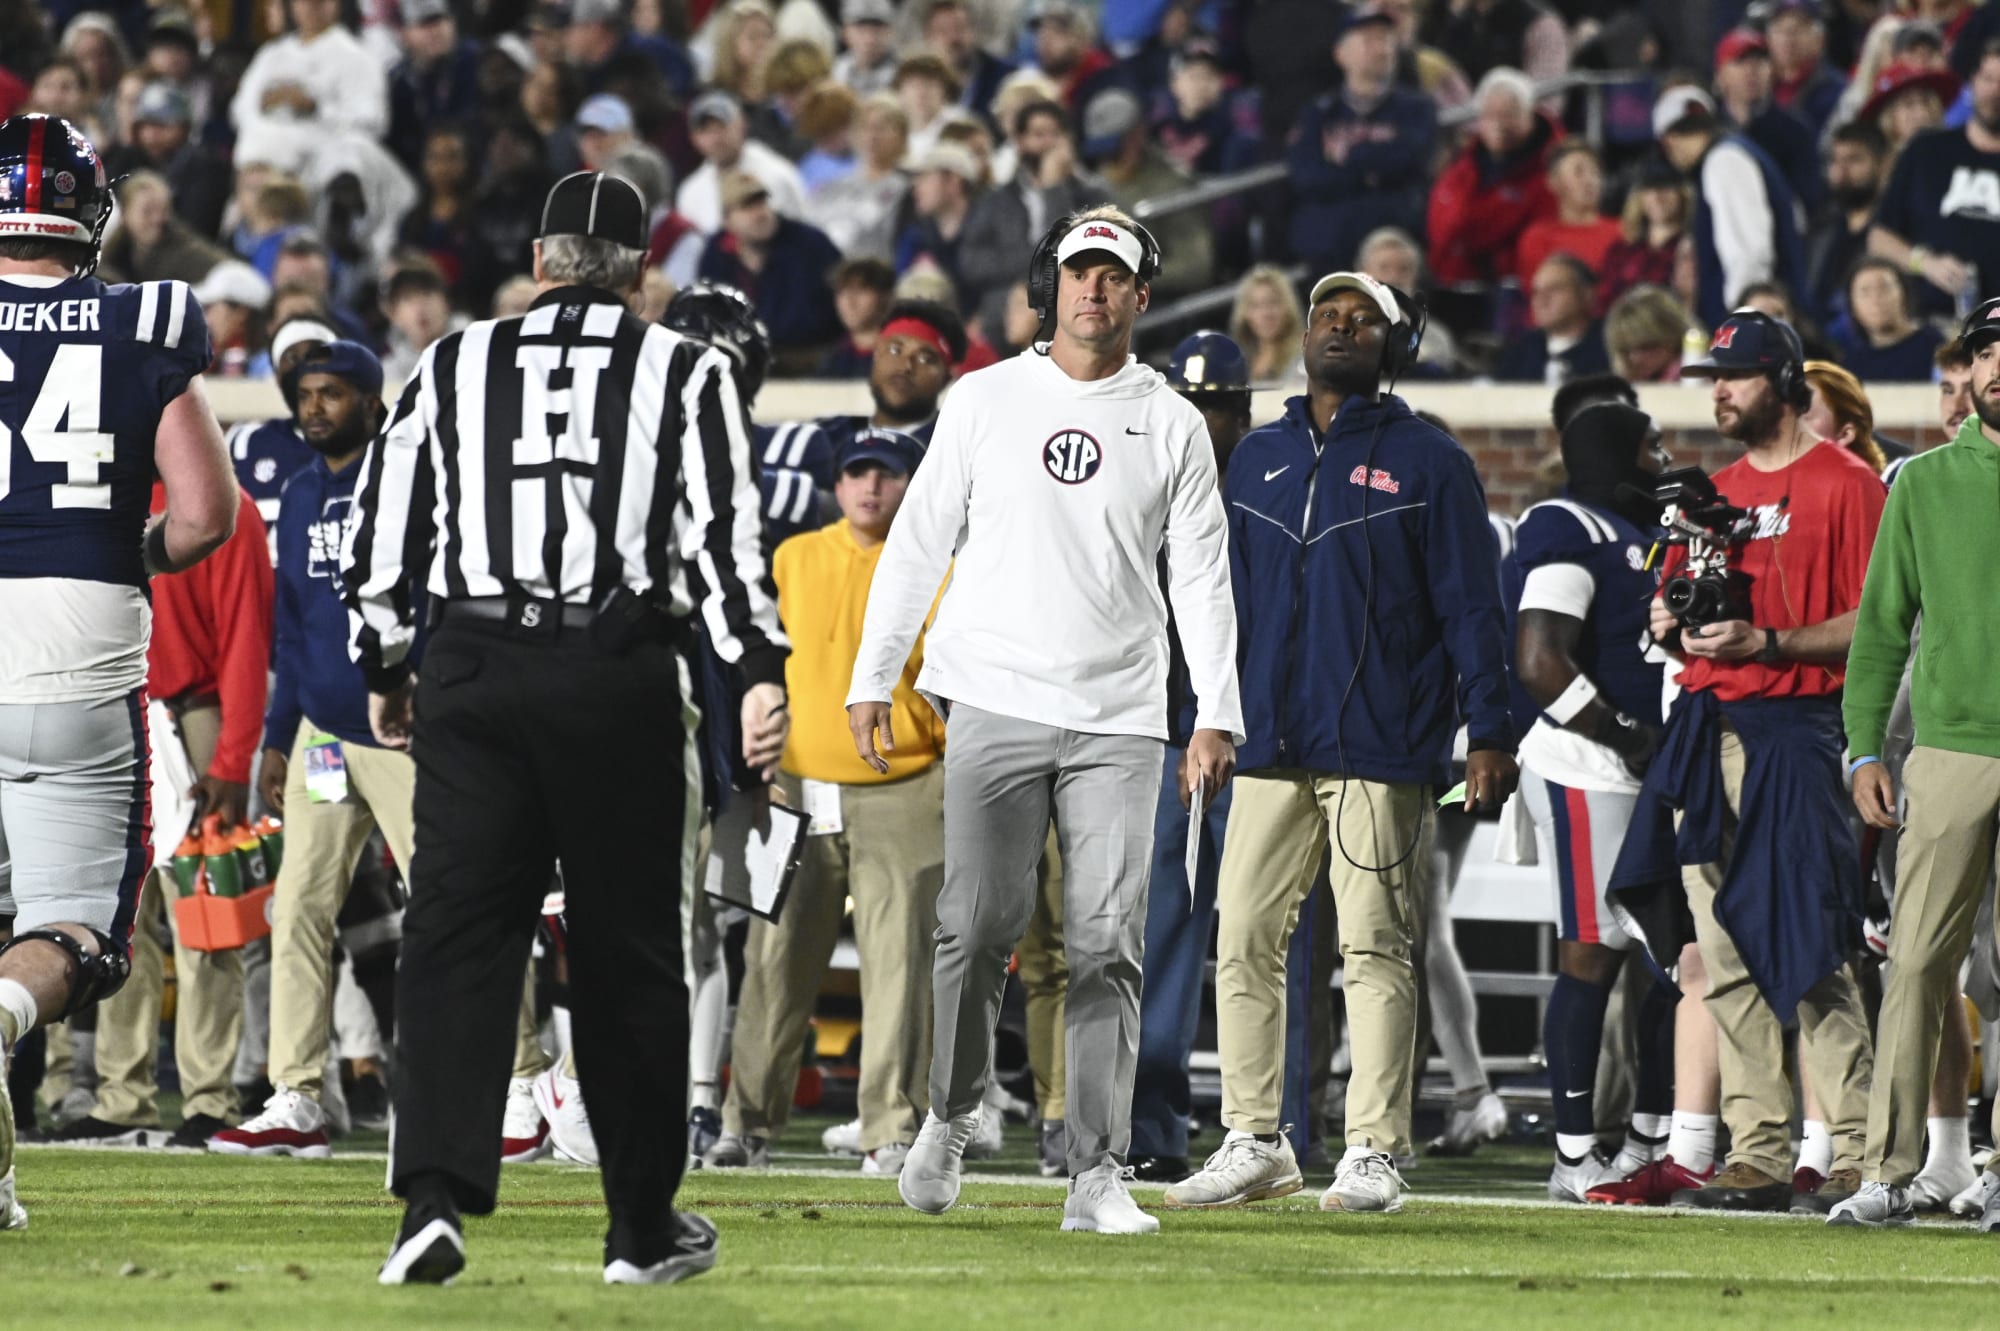 Egg Bowl descends into complete fan chaos: Here’s everything that happened (Video)